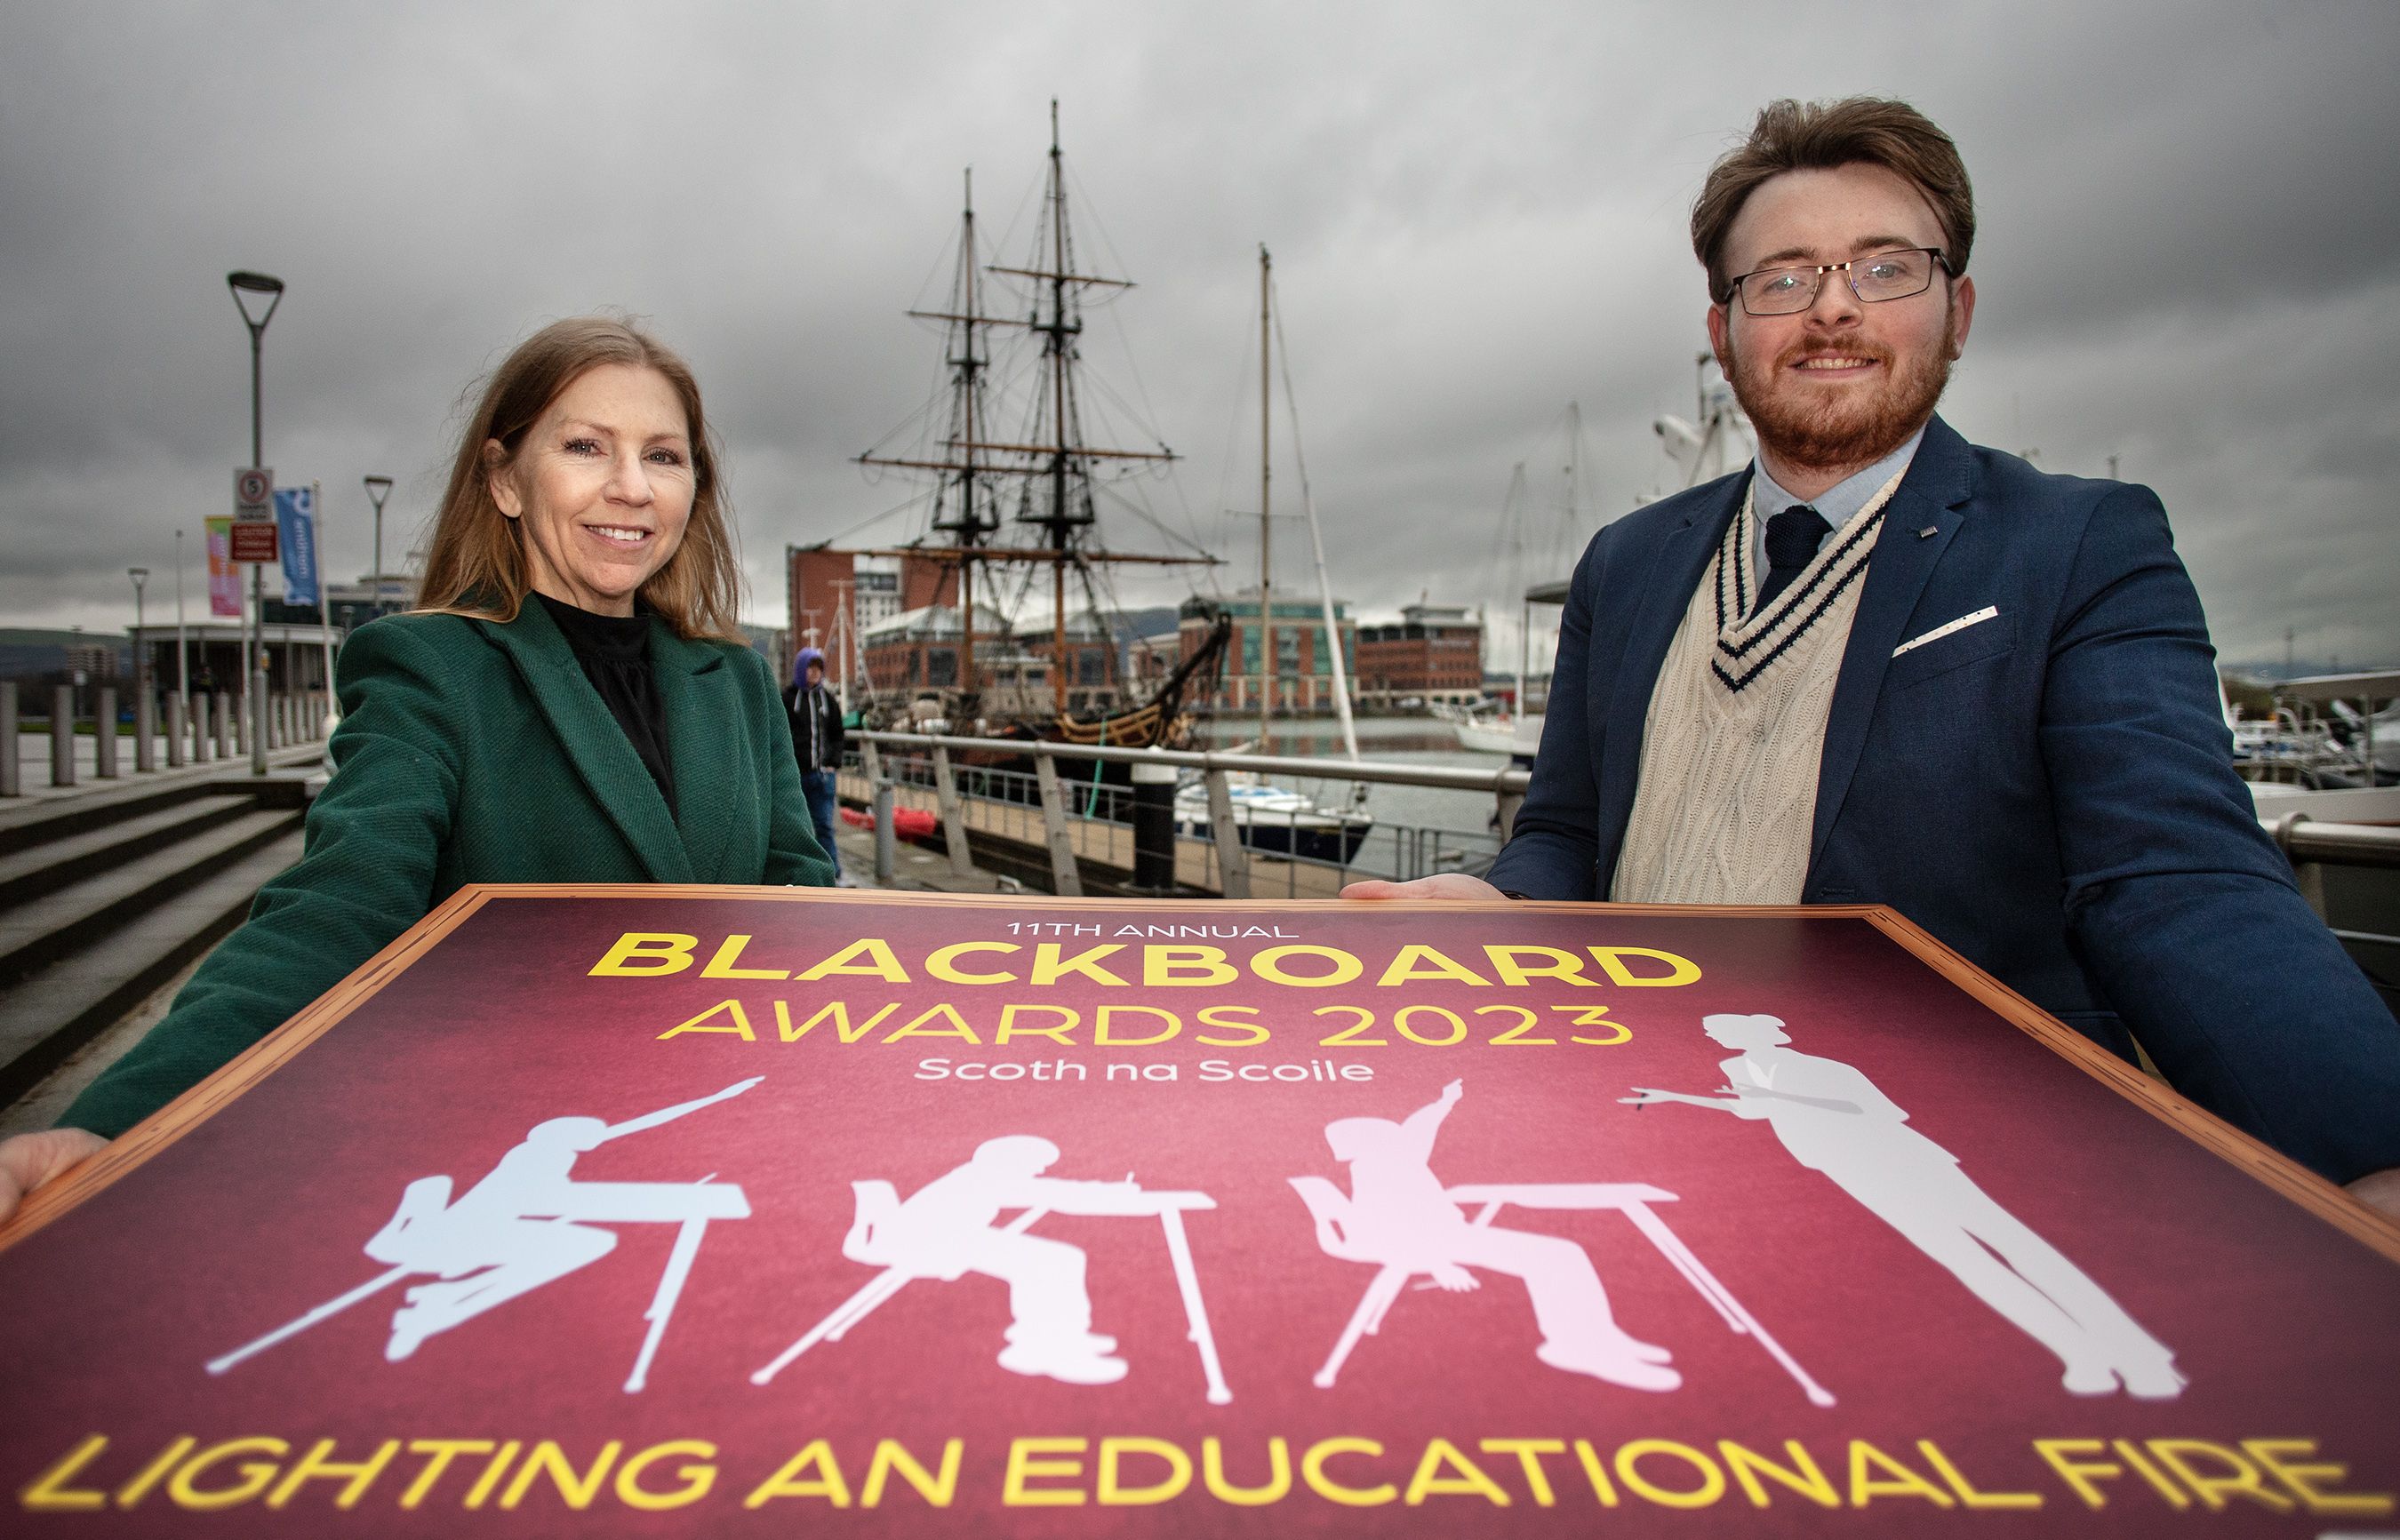 ALL ABOARD: Maeve Moreland from Maritime Belfast Trust with journalist James McCarthy ahead of the Blackboard Awards